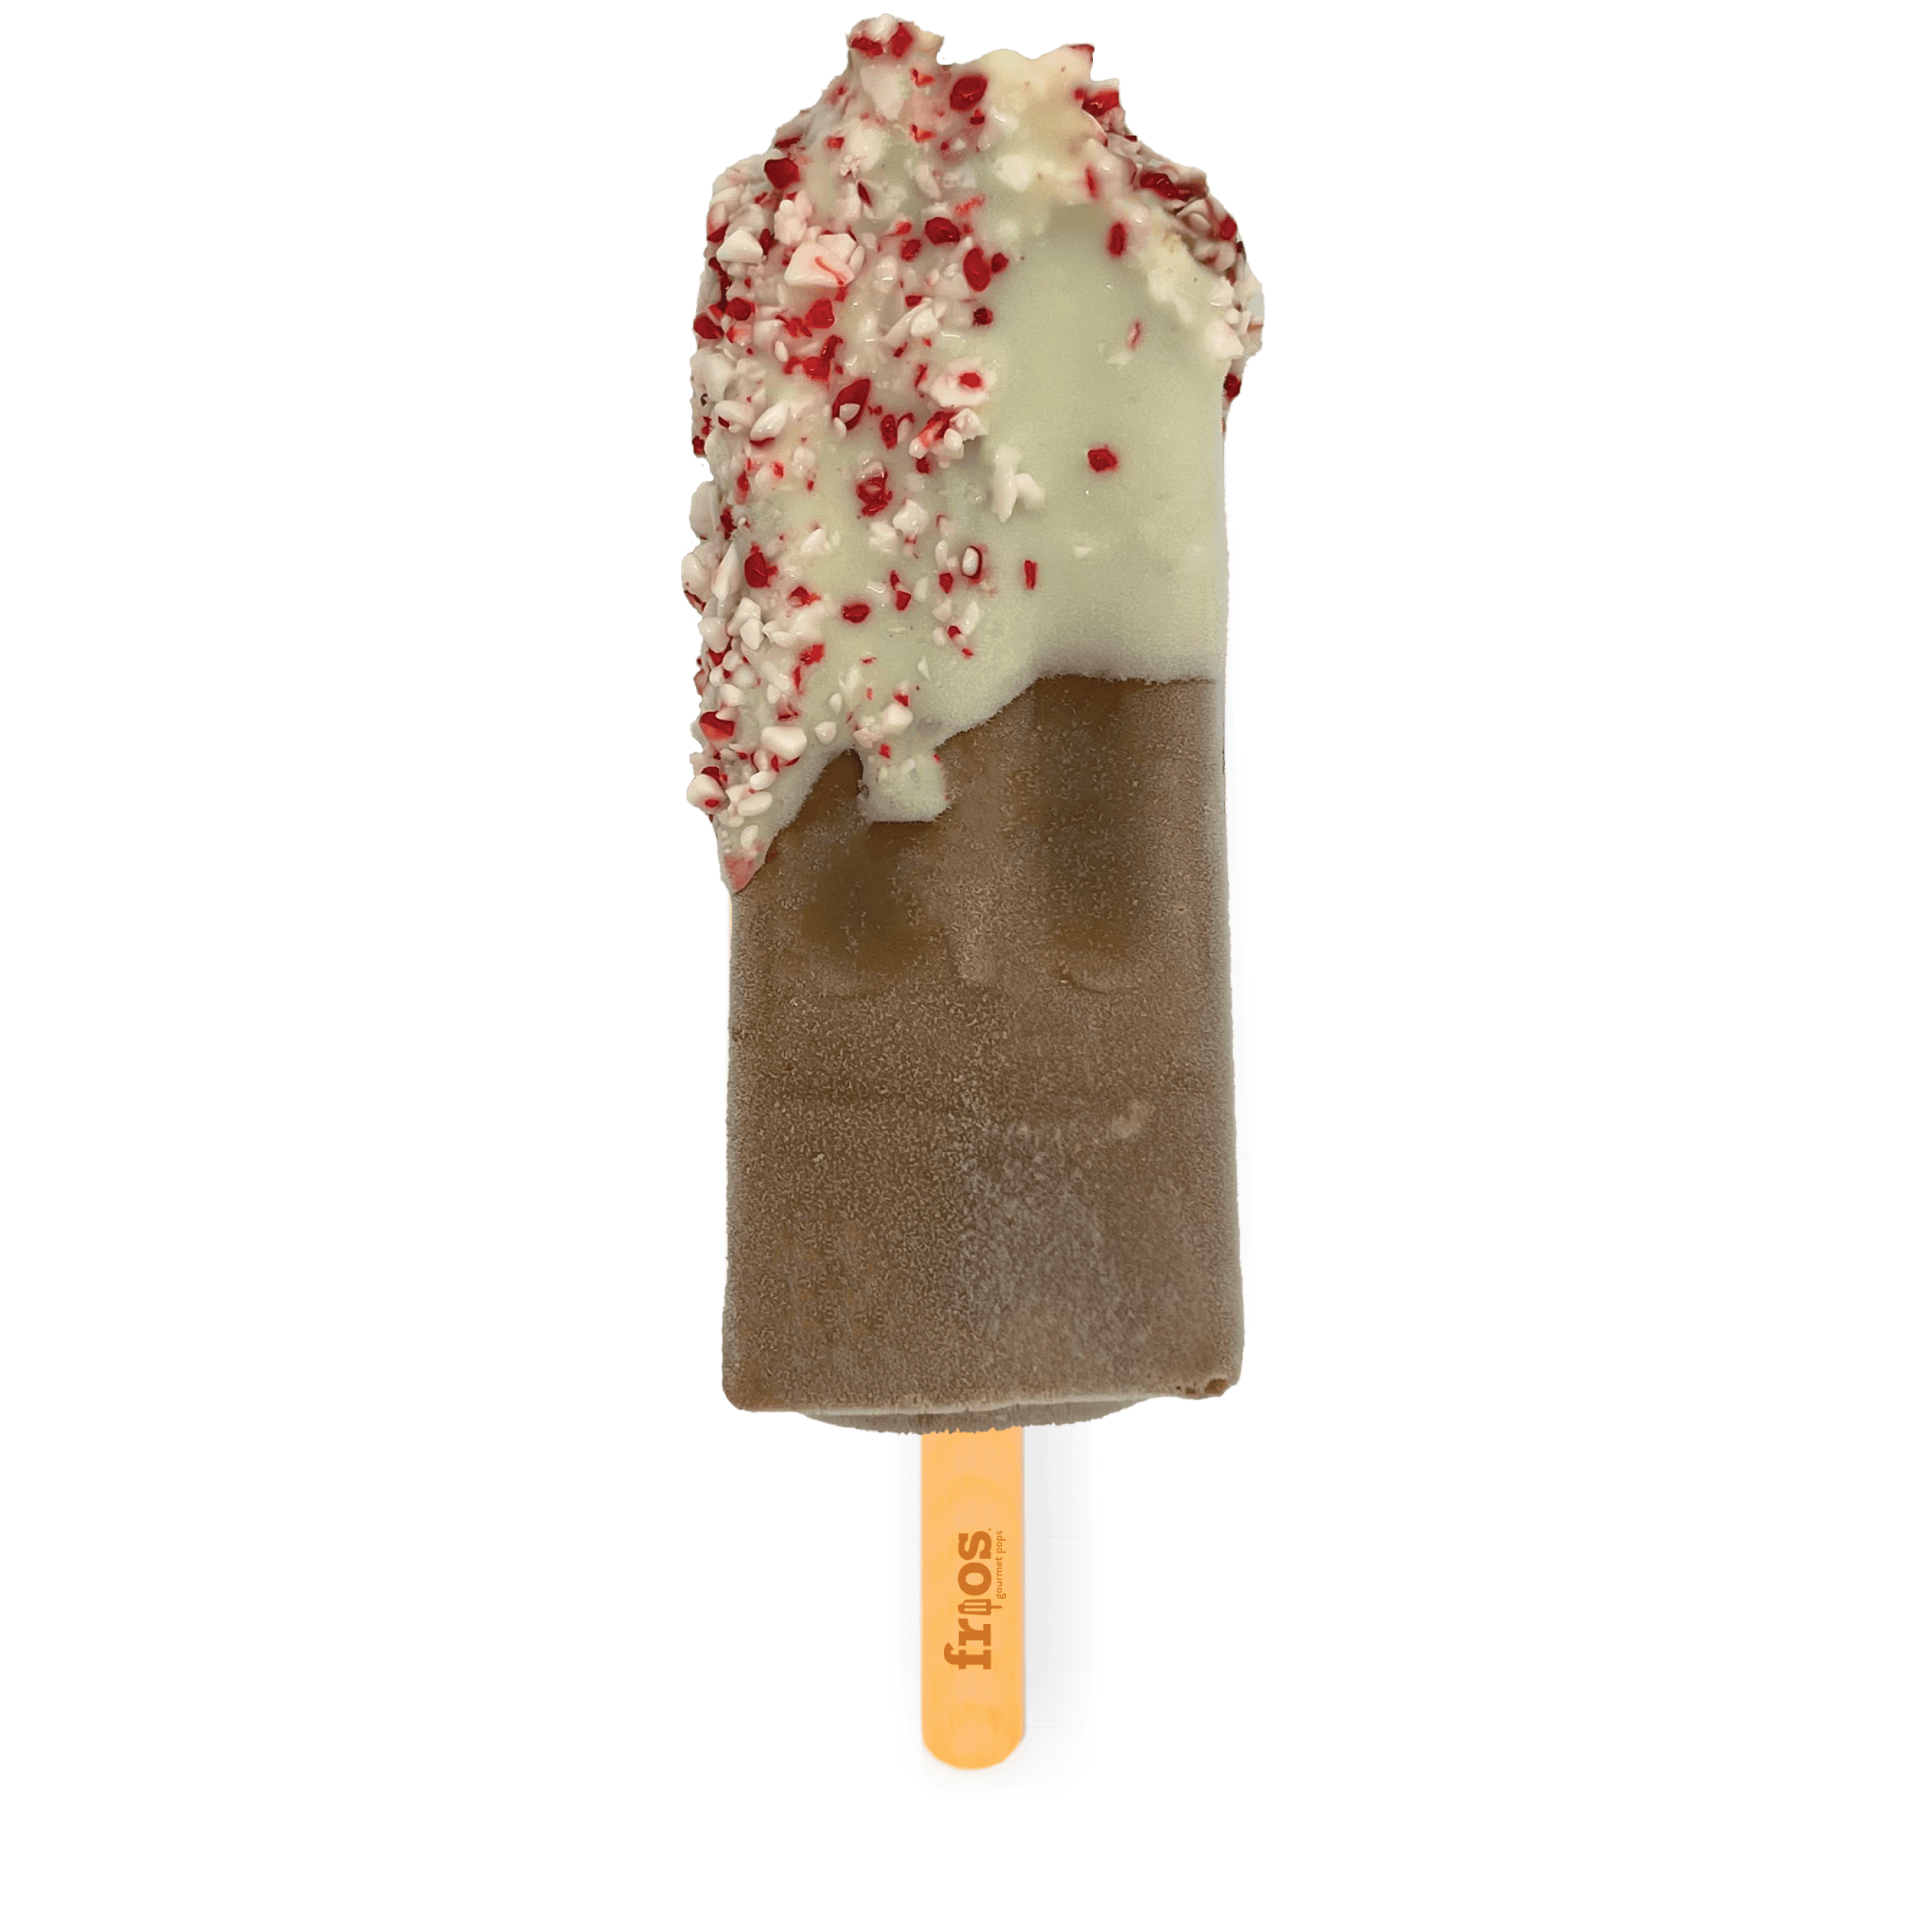 chocolate peppermint frios pops